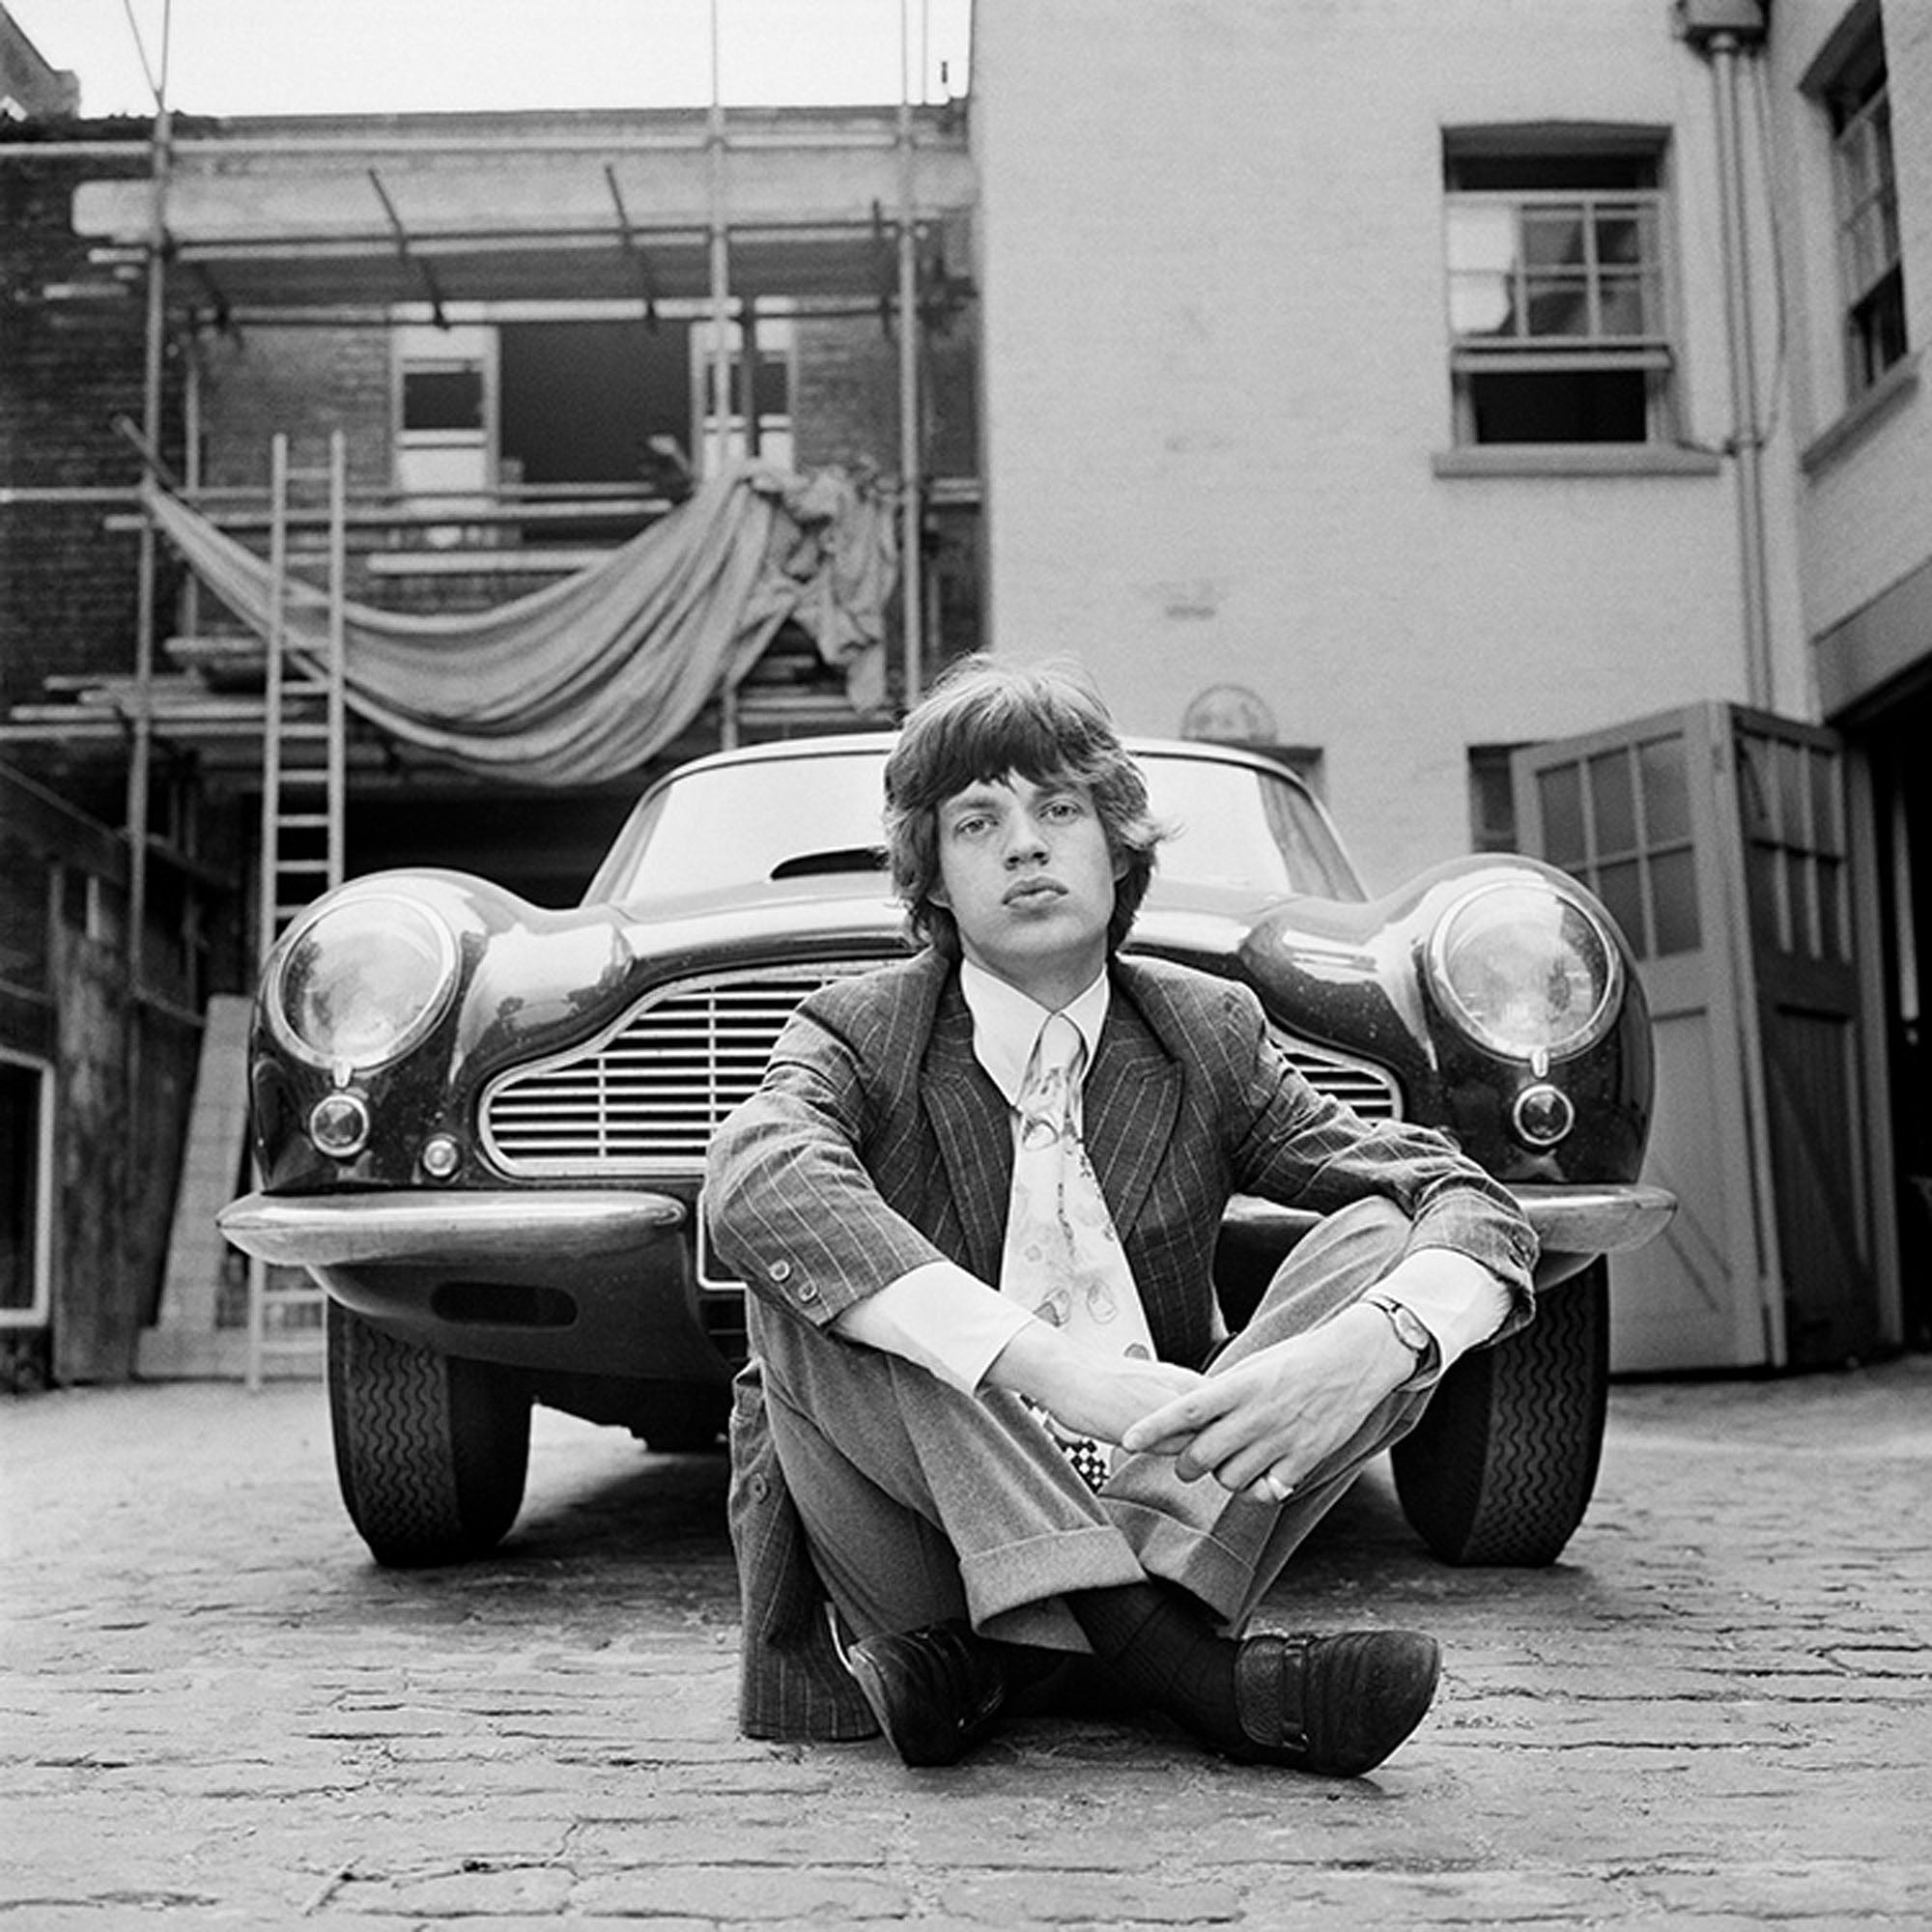  Mick Jagger photographed next to an Aston Martin DB6 car in London, 1966. Gered Mankowitz